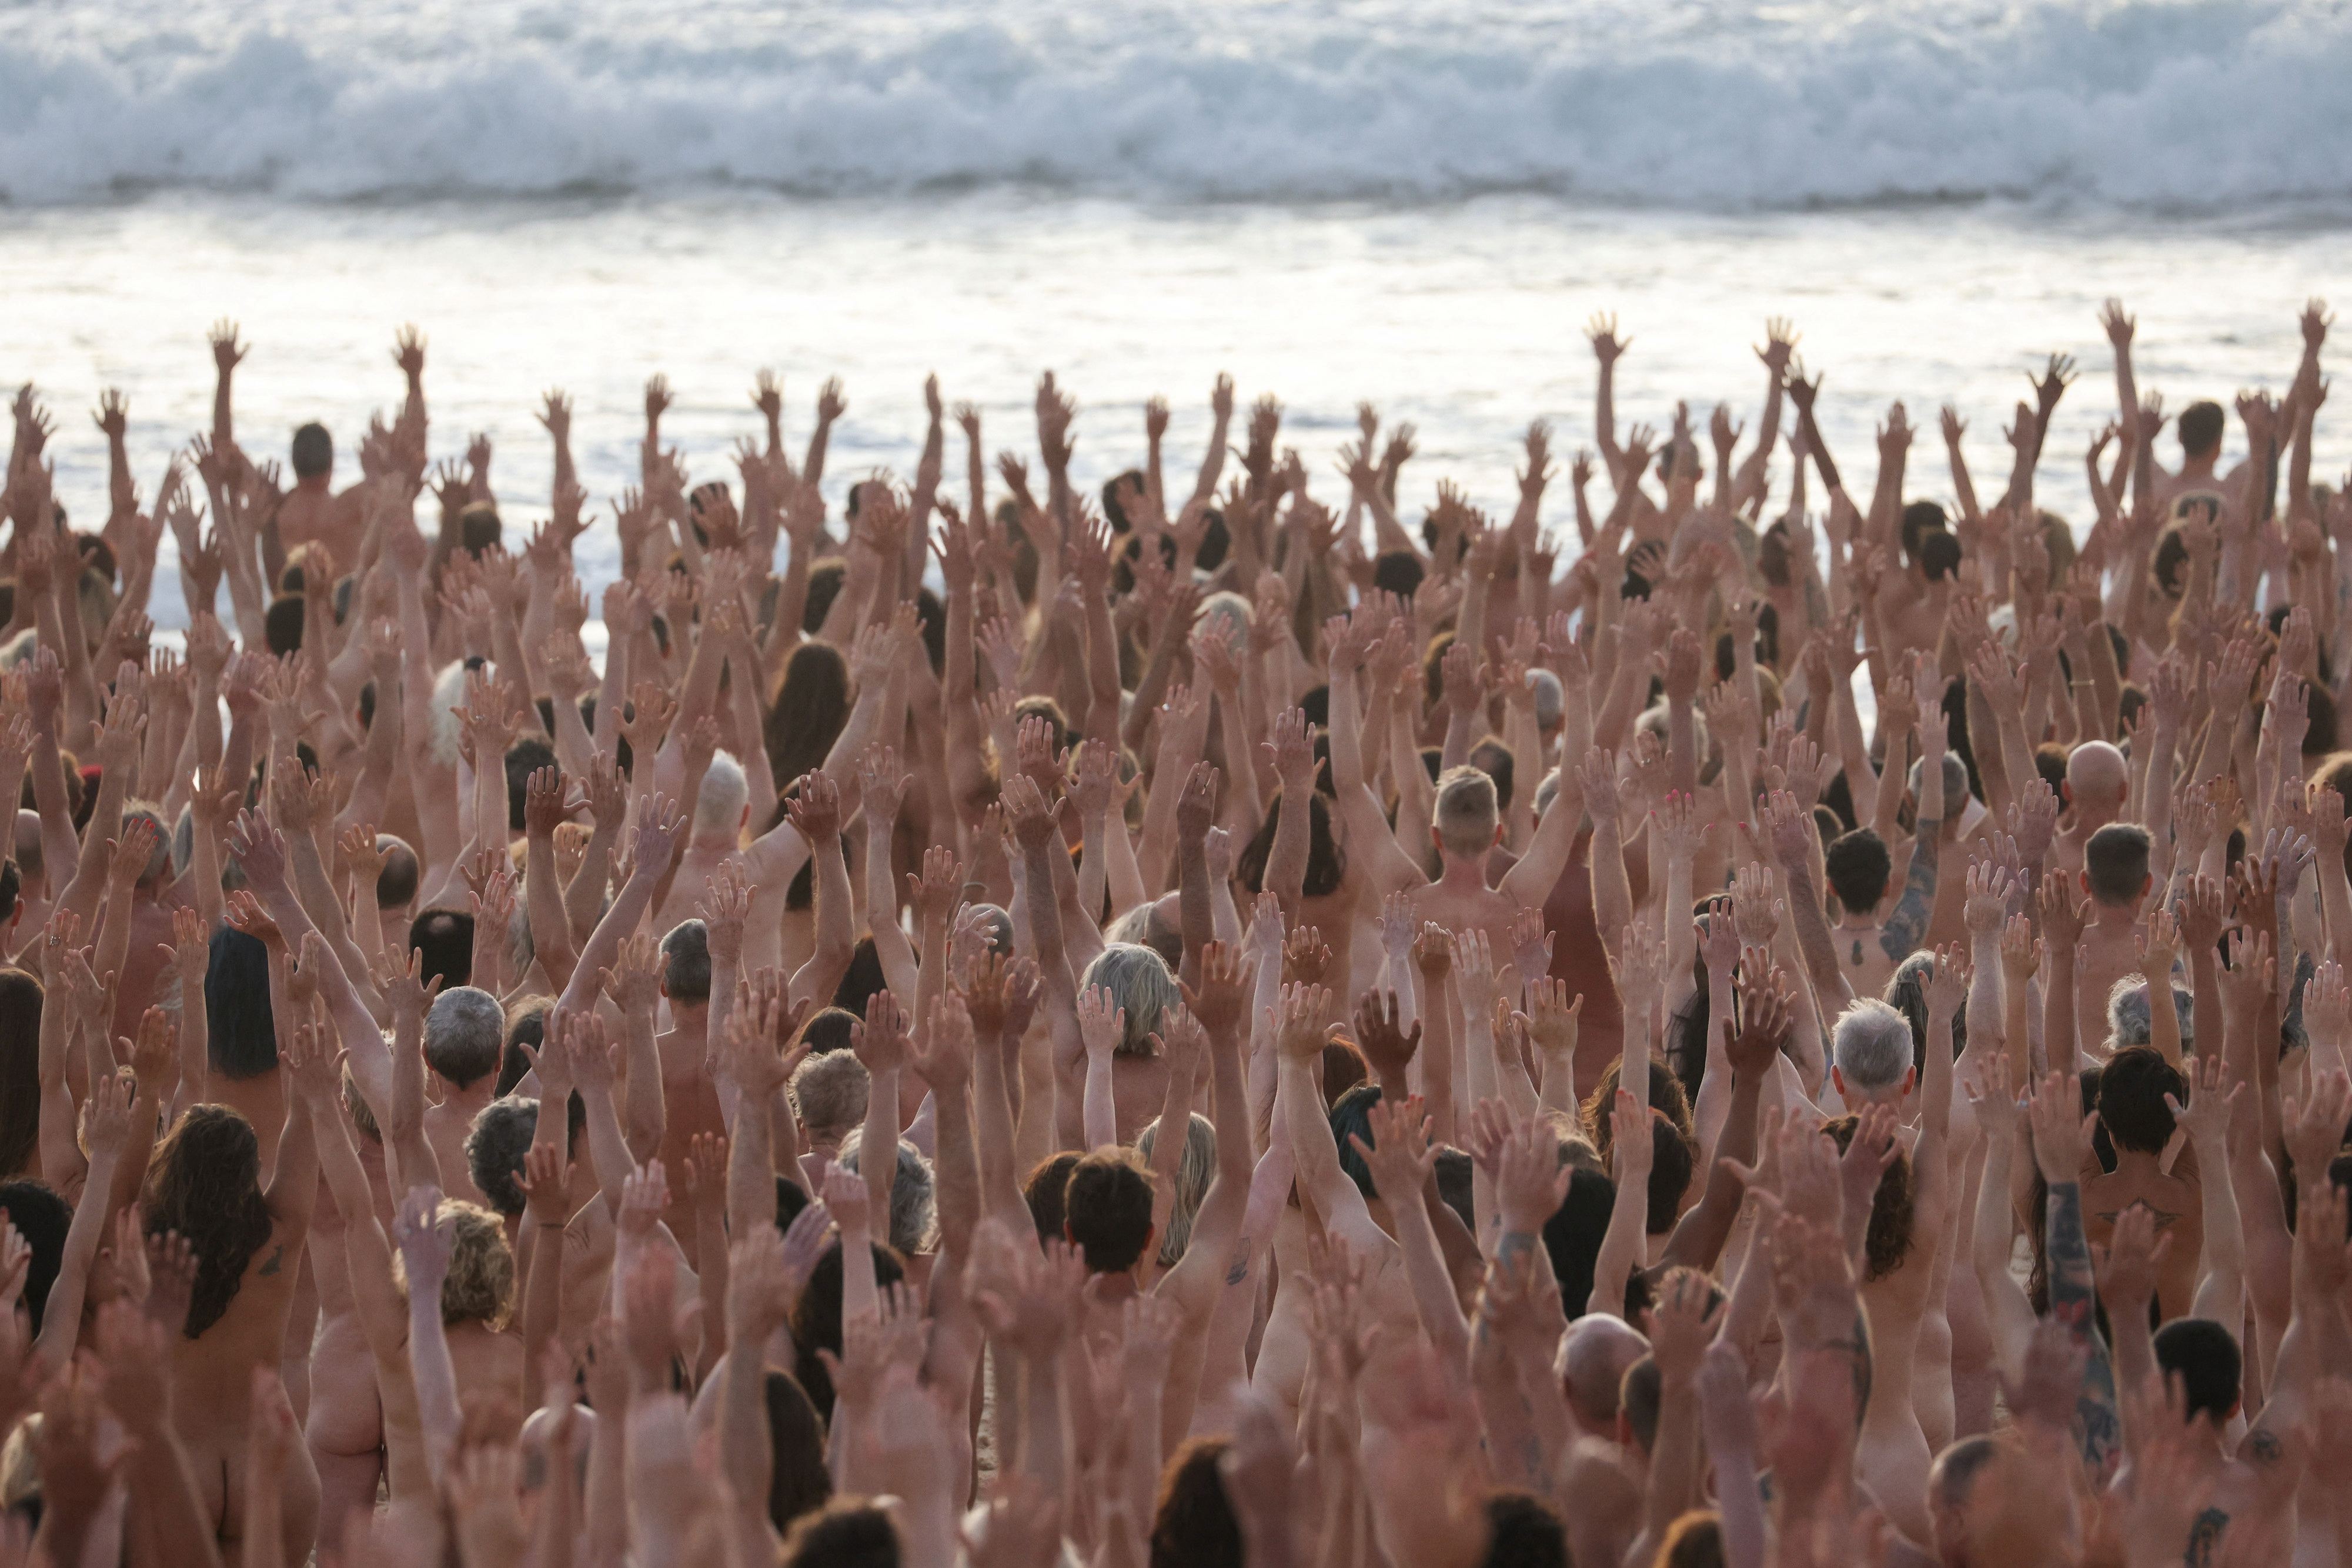 Beach Strip Nude - Aussies strip for cancer awareness photo shoot | Otago Daily Times Online  News